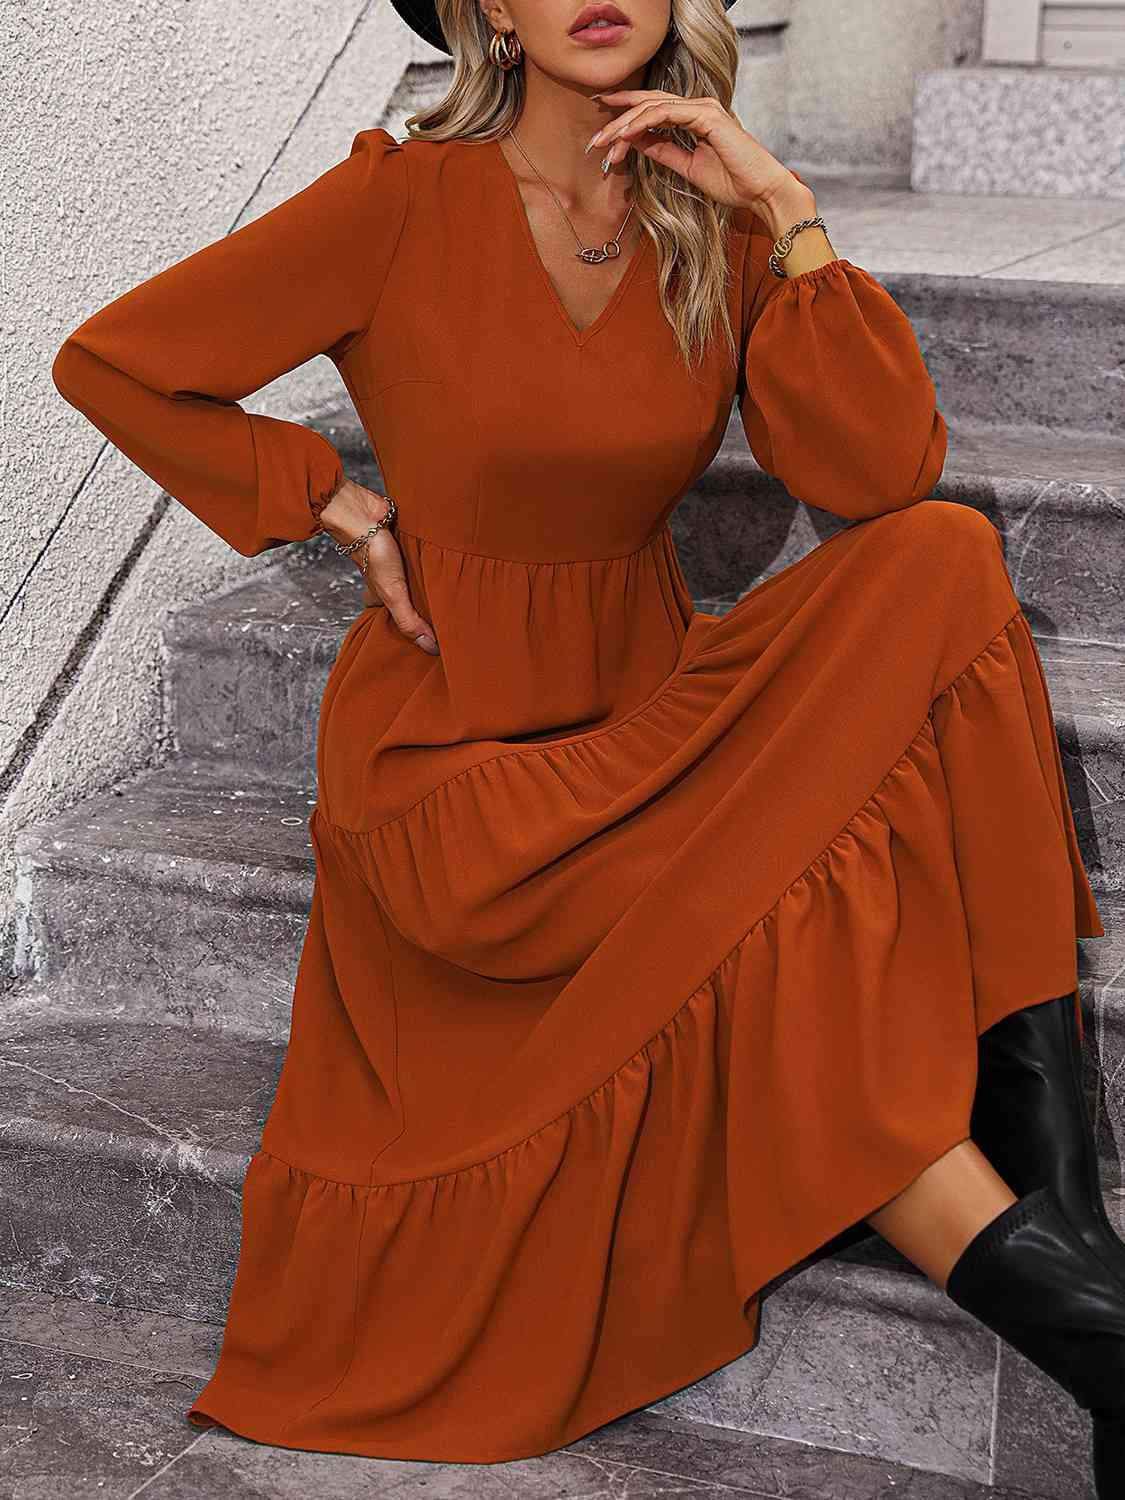 a woman sitting on steps wearing a brown dress